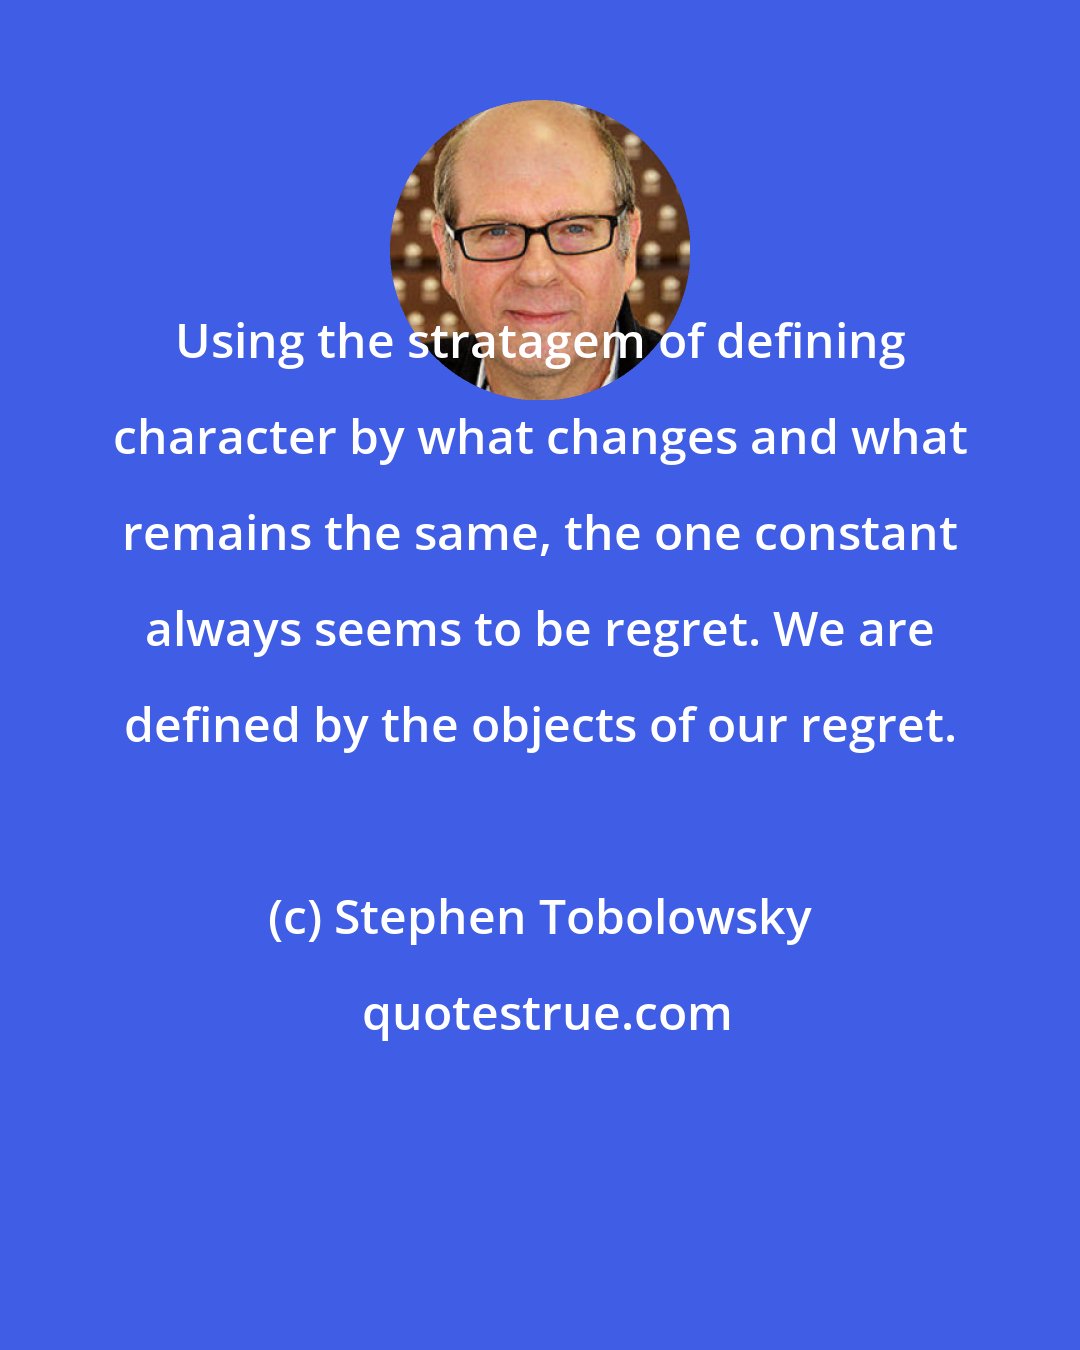 Stephen Tobolowsky: Using the stratagem of defining character by what changes and what remains the same, the one constant always seems to be regret. We are defined by the objects of our regret.